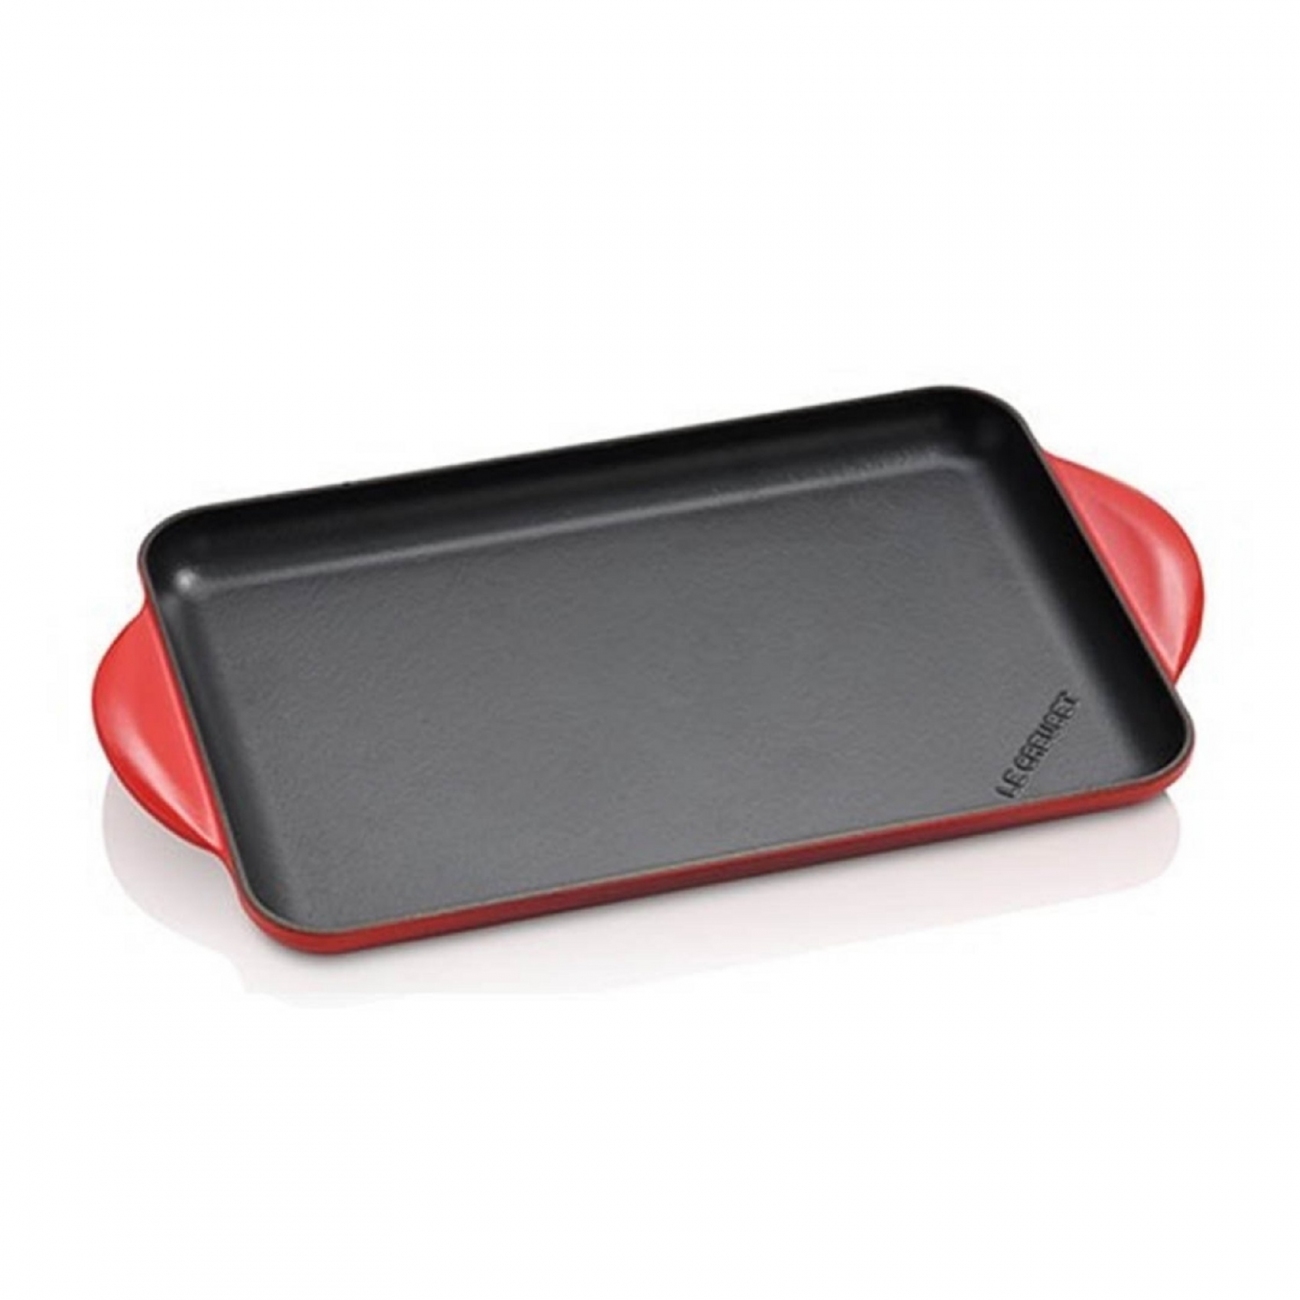 Le Creuset Rectangular Traditional Smooth Grill 32 cherry